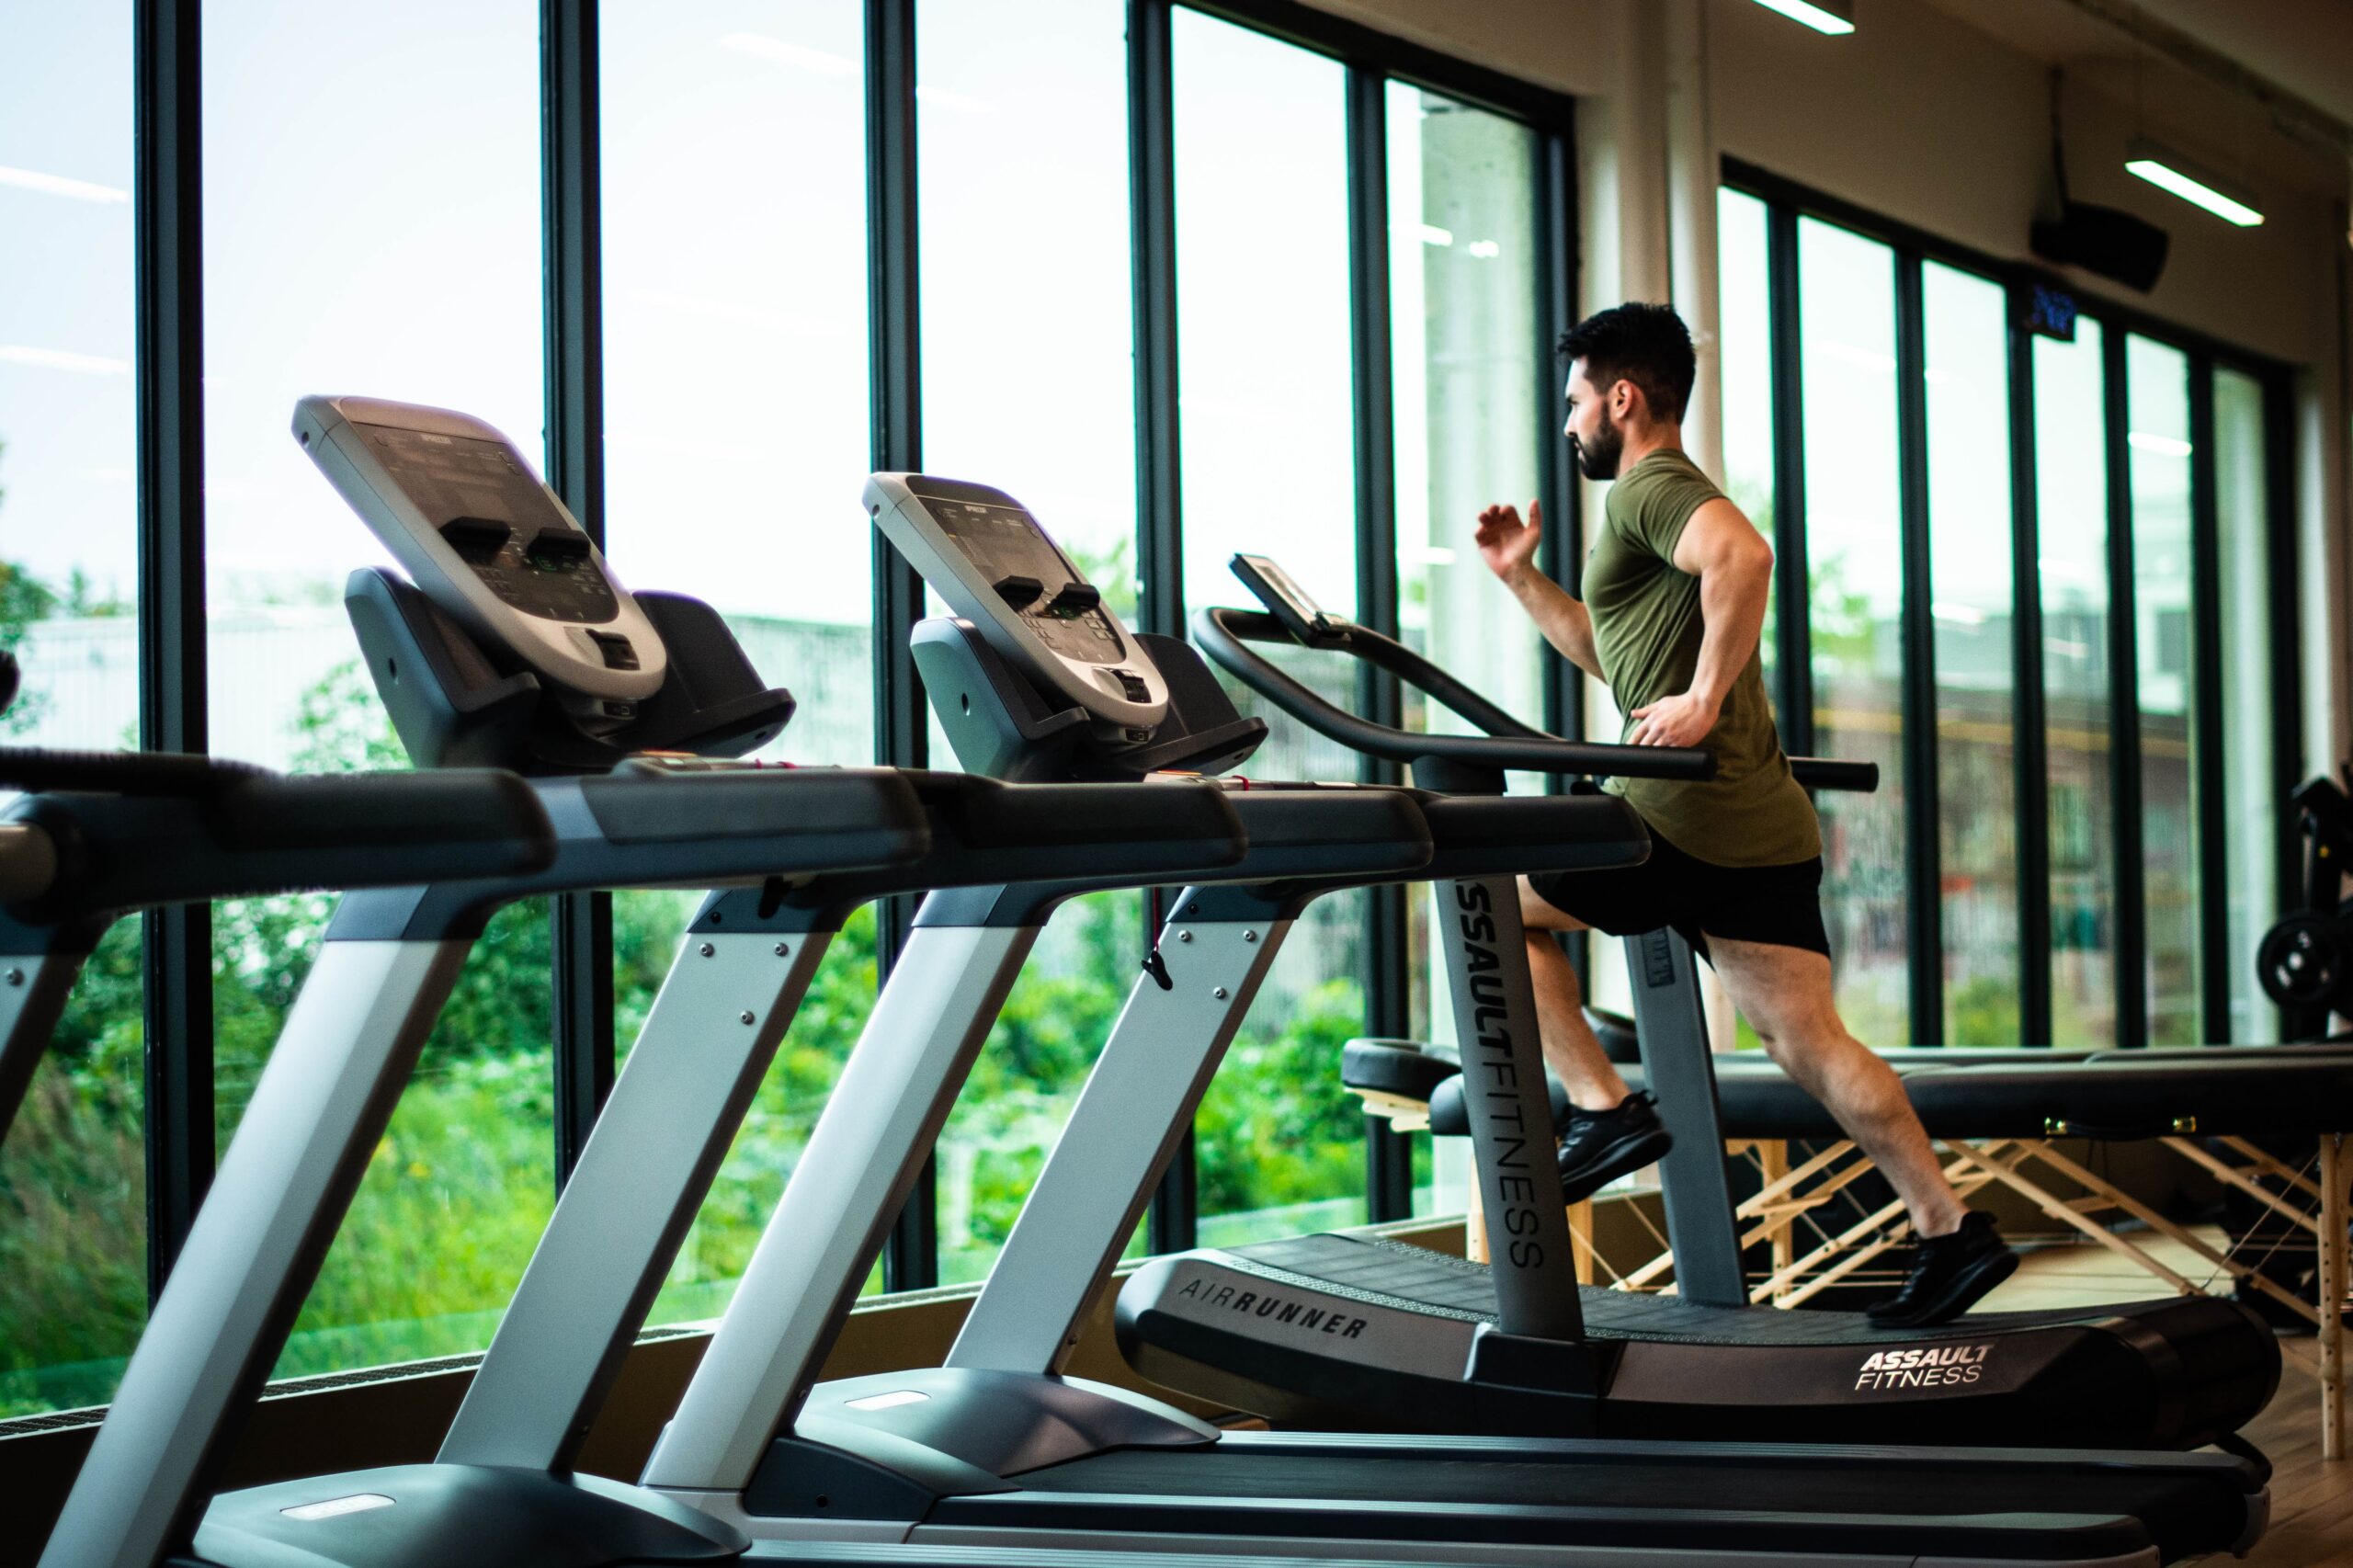 Is it better to use a treadmill or an elliptical machine?